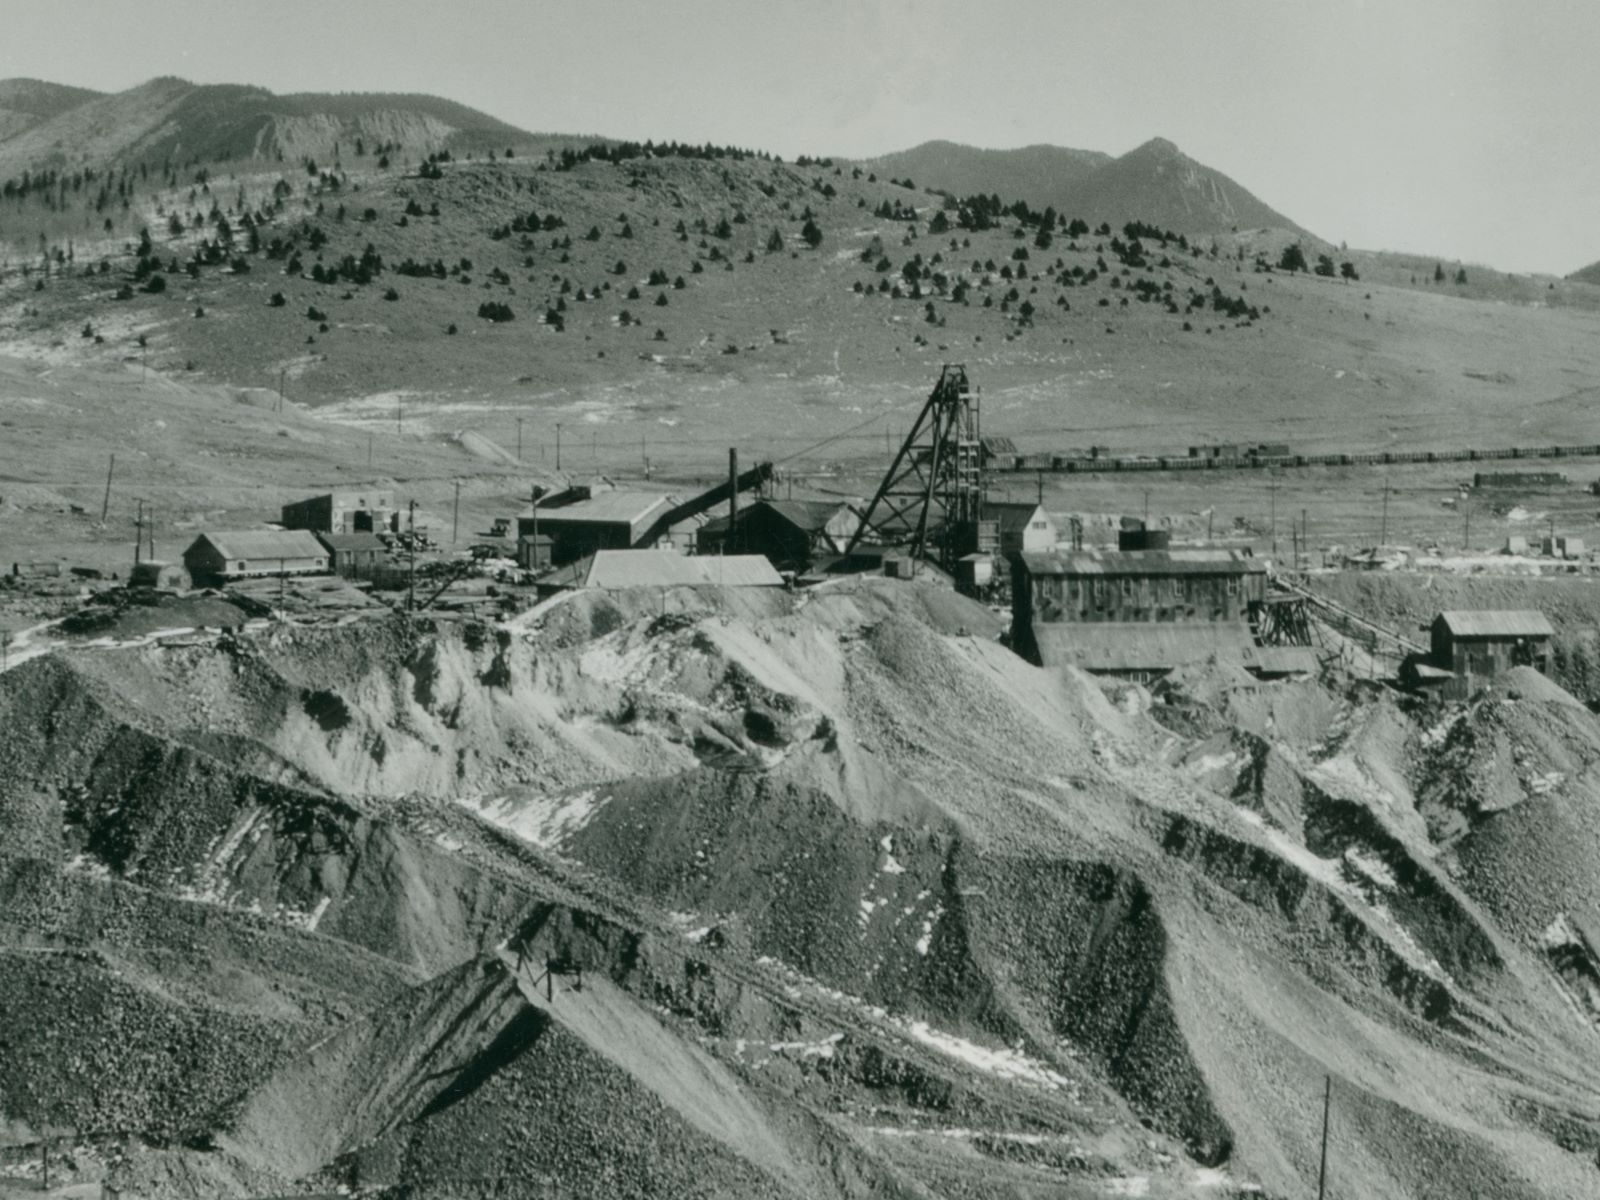 Cropped view of the Vindicator Mine Operations 1934-ish style. Huge dumps covering the ground, the Ore-House is partly buried in them it appears. Not the best view, but it is a long distance shot from near the Last Dollar mine on bull Hill, so hard to get a good quality shot.
   Behind the large Headframe is seen a huge string of boxcars in the Bull Hill Yards of the Midland Terminal, making up the background scene behind the more top part of the headframe of the Vindicator, and of course the mountains in the horizon background.